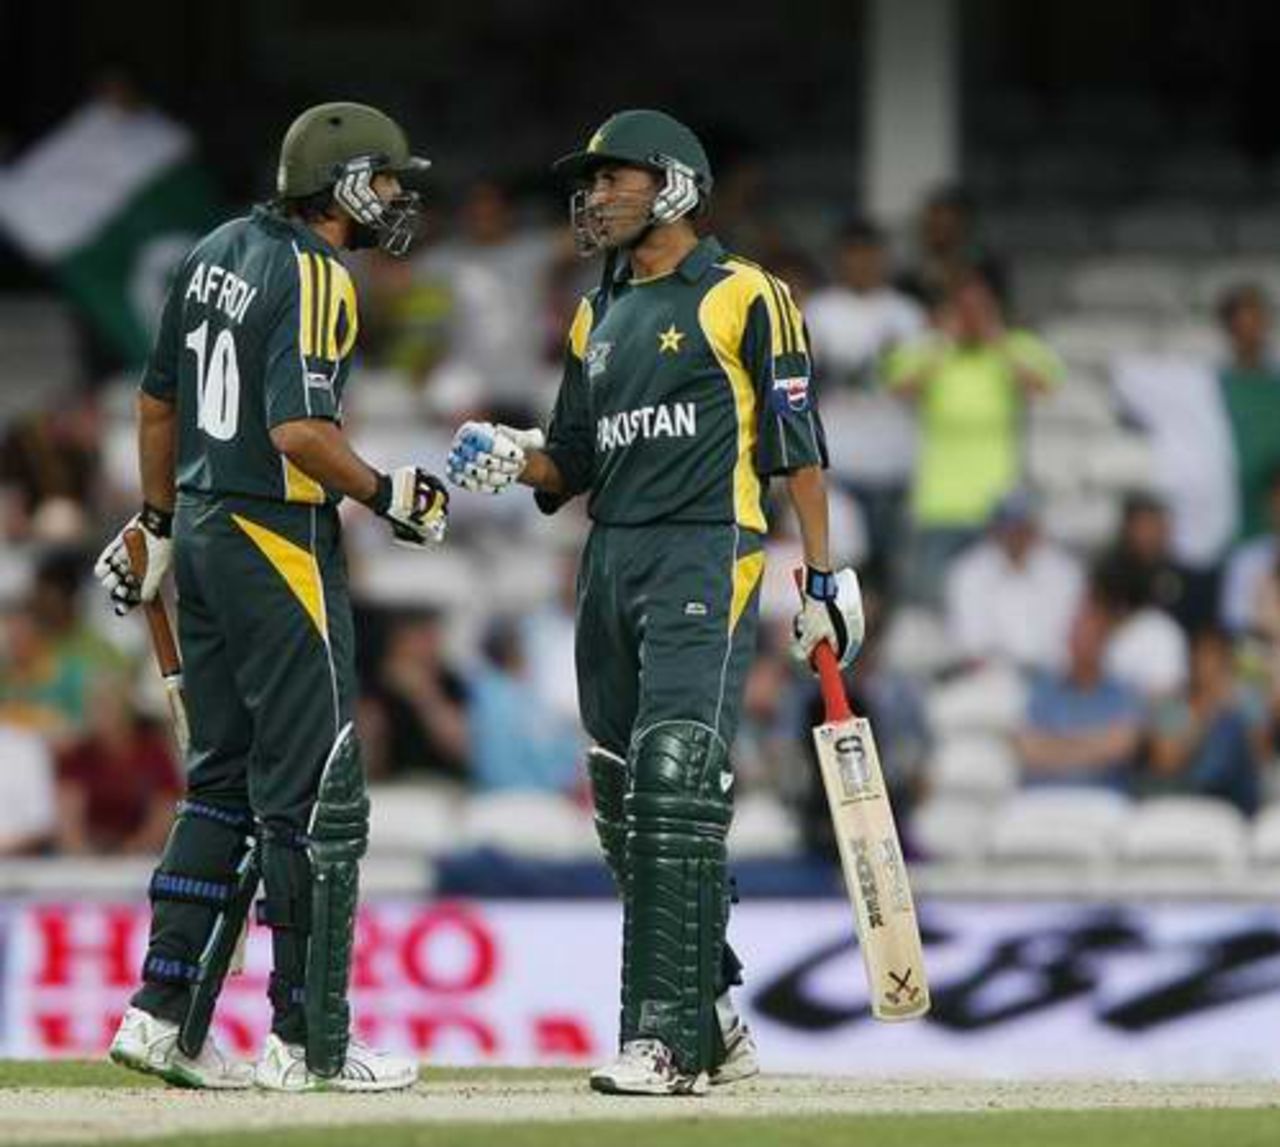 Shahid Afridi and Younis Khan confer during their innings, New Zealand v Pakistan, World Twenty20 , The Oval, June 13, 2009